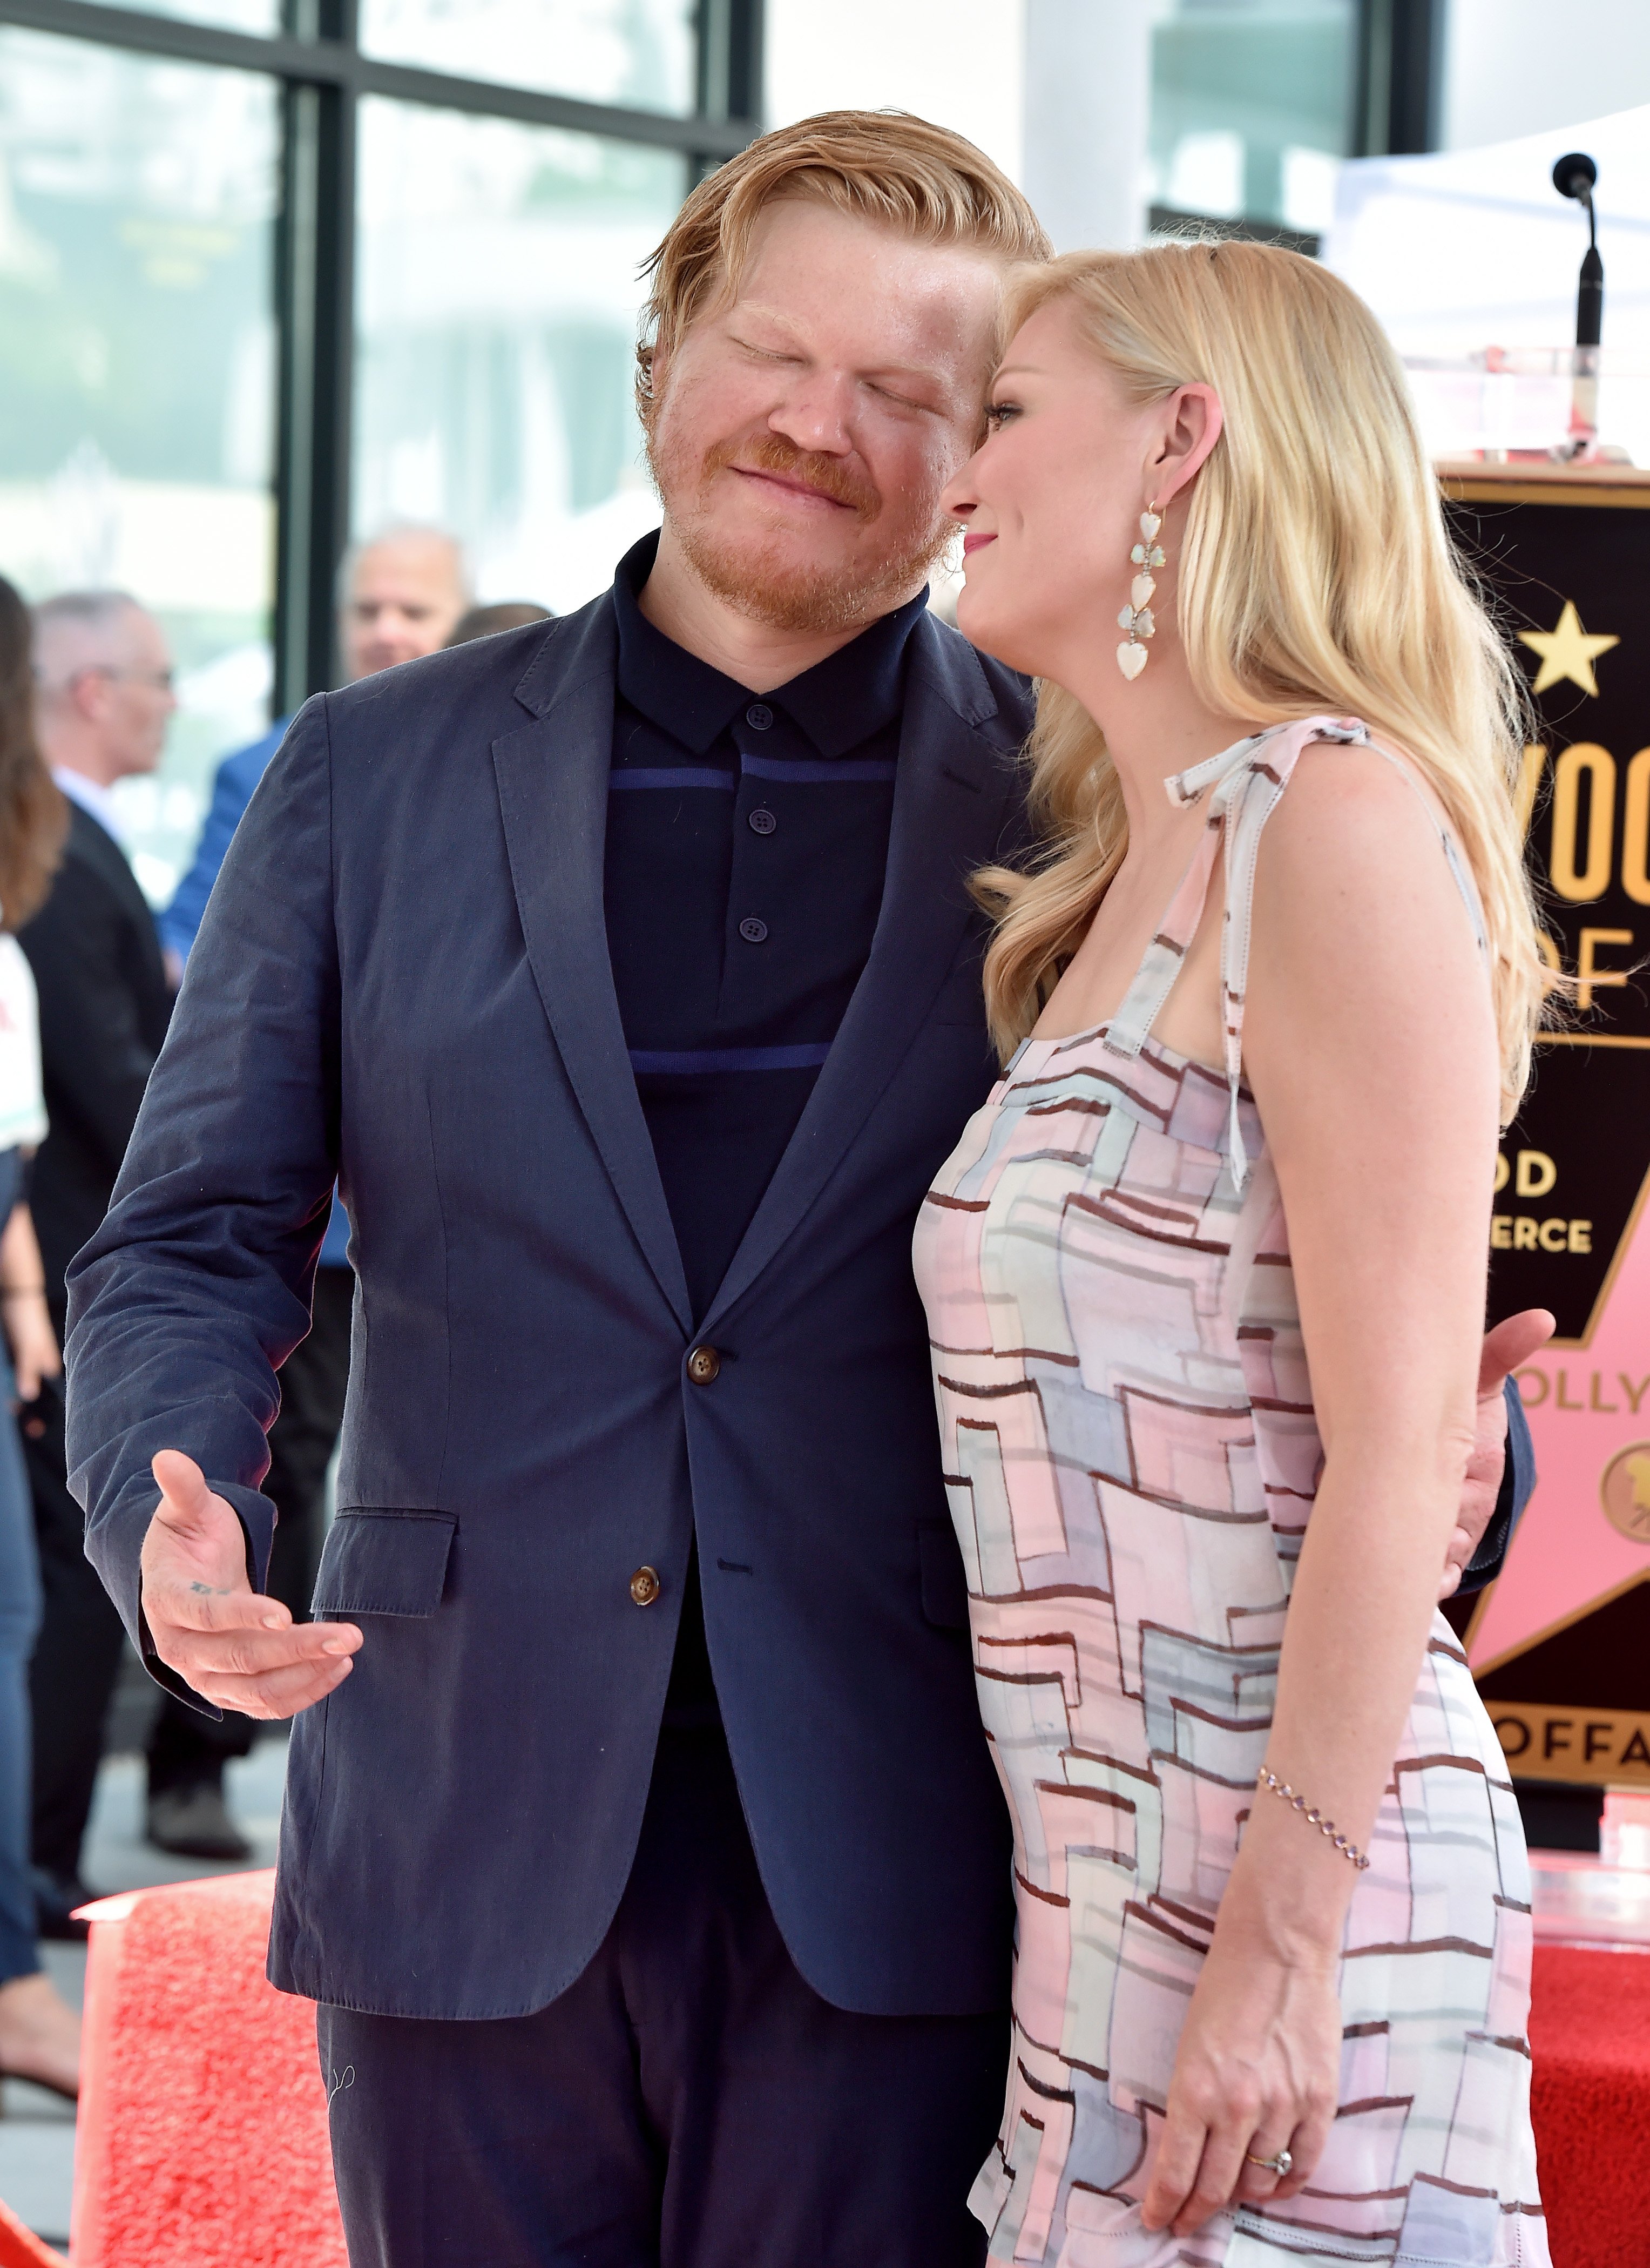 Jesse Plemons attends the ceremonial honoring of Kirsten Dunst with a star on the Hollywood Walk of Fame on August 29, 2019 in Hollywood, California. | Photo: Getty Images